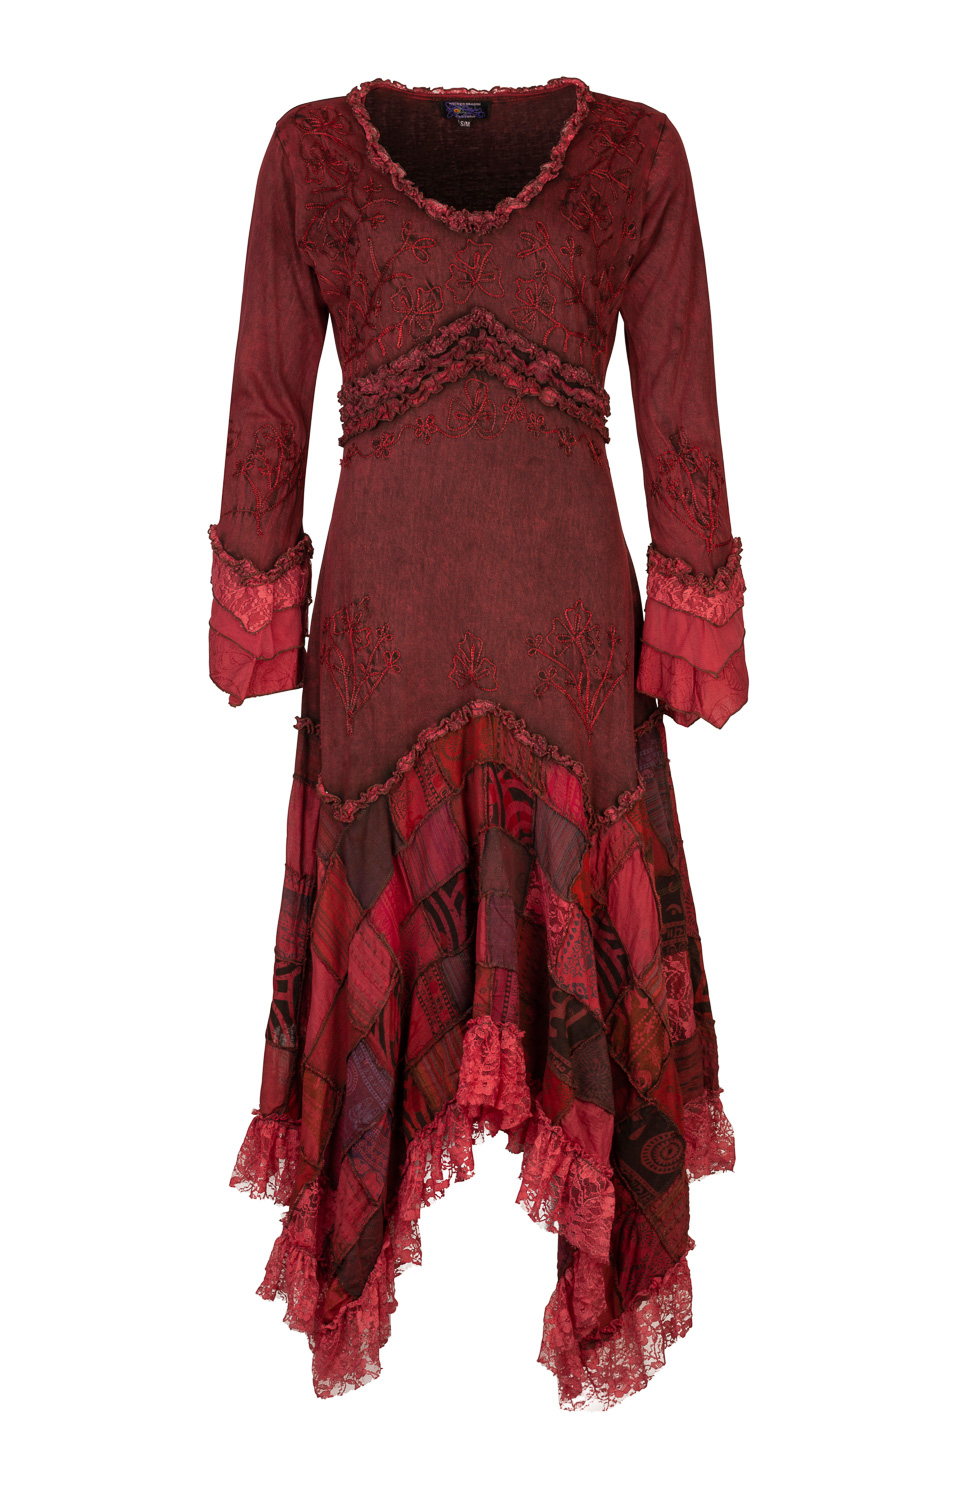 Wicked Dragon Clothing - Long boho style dress with patchwork skirt